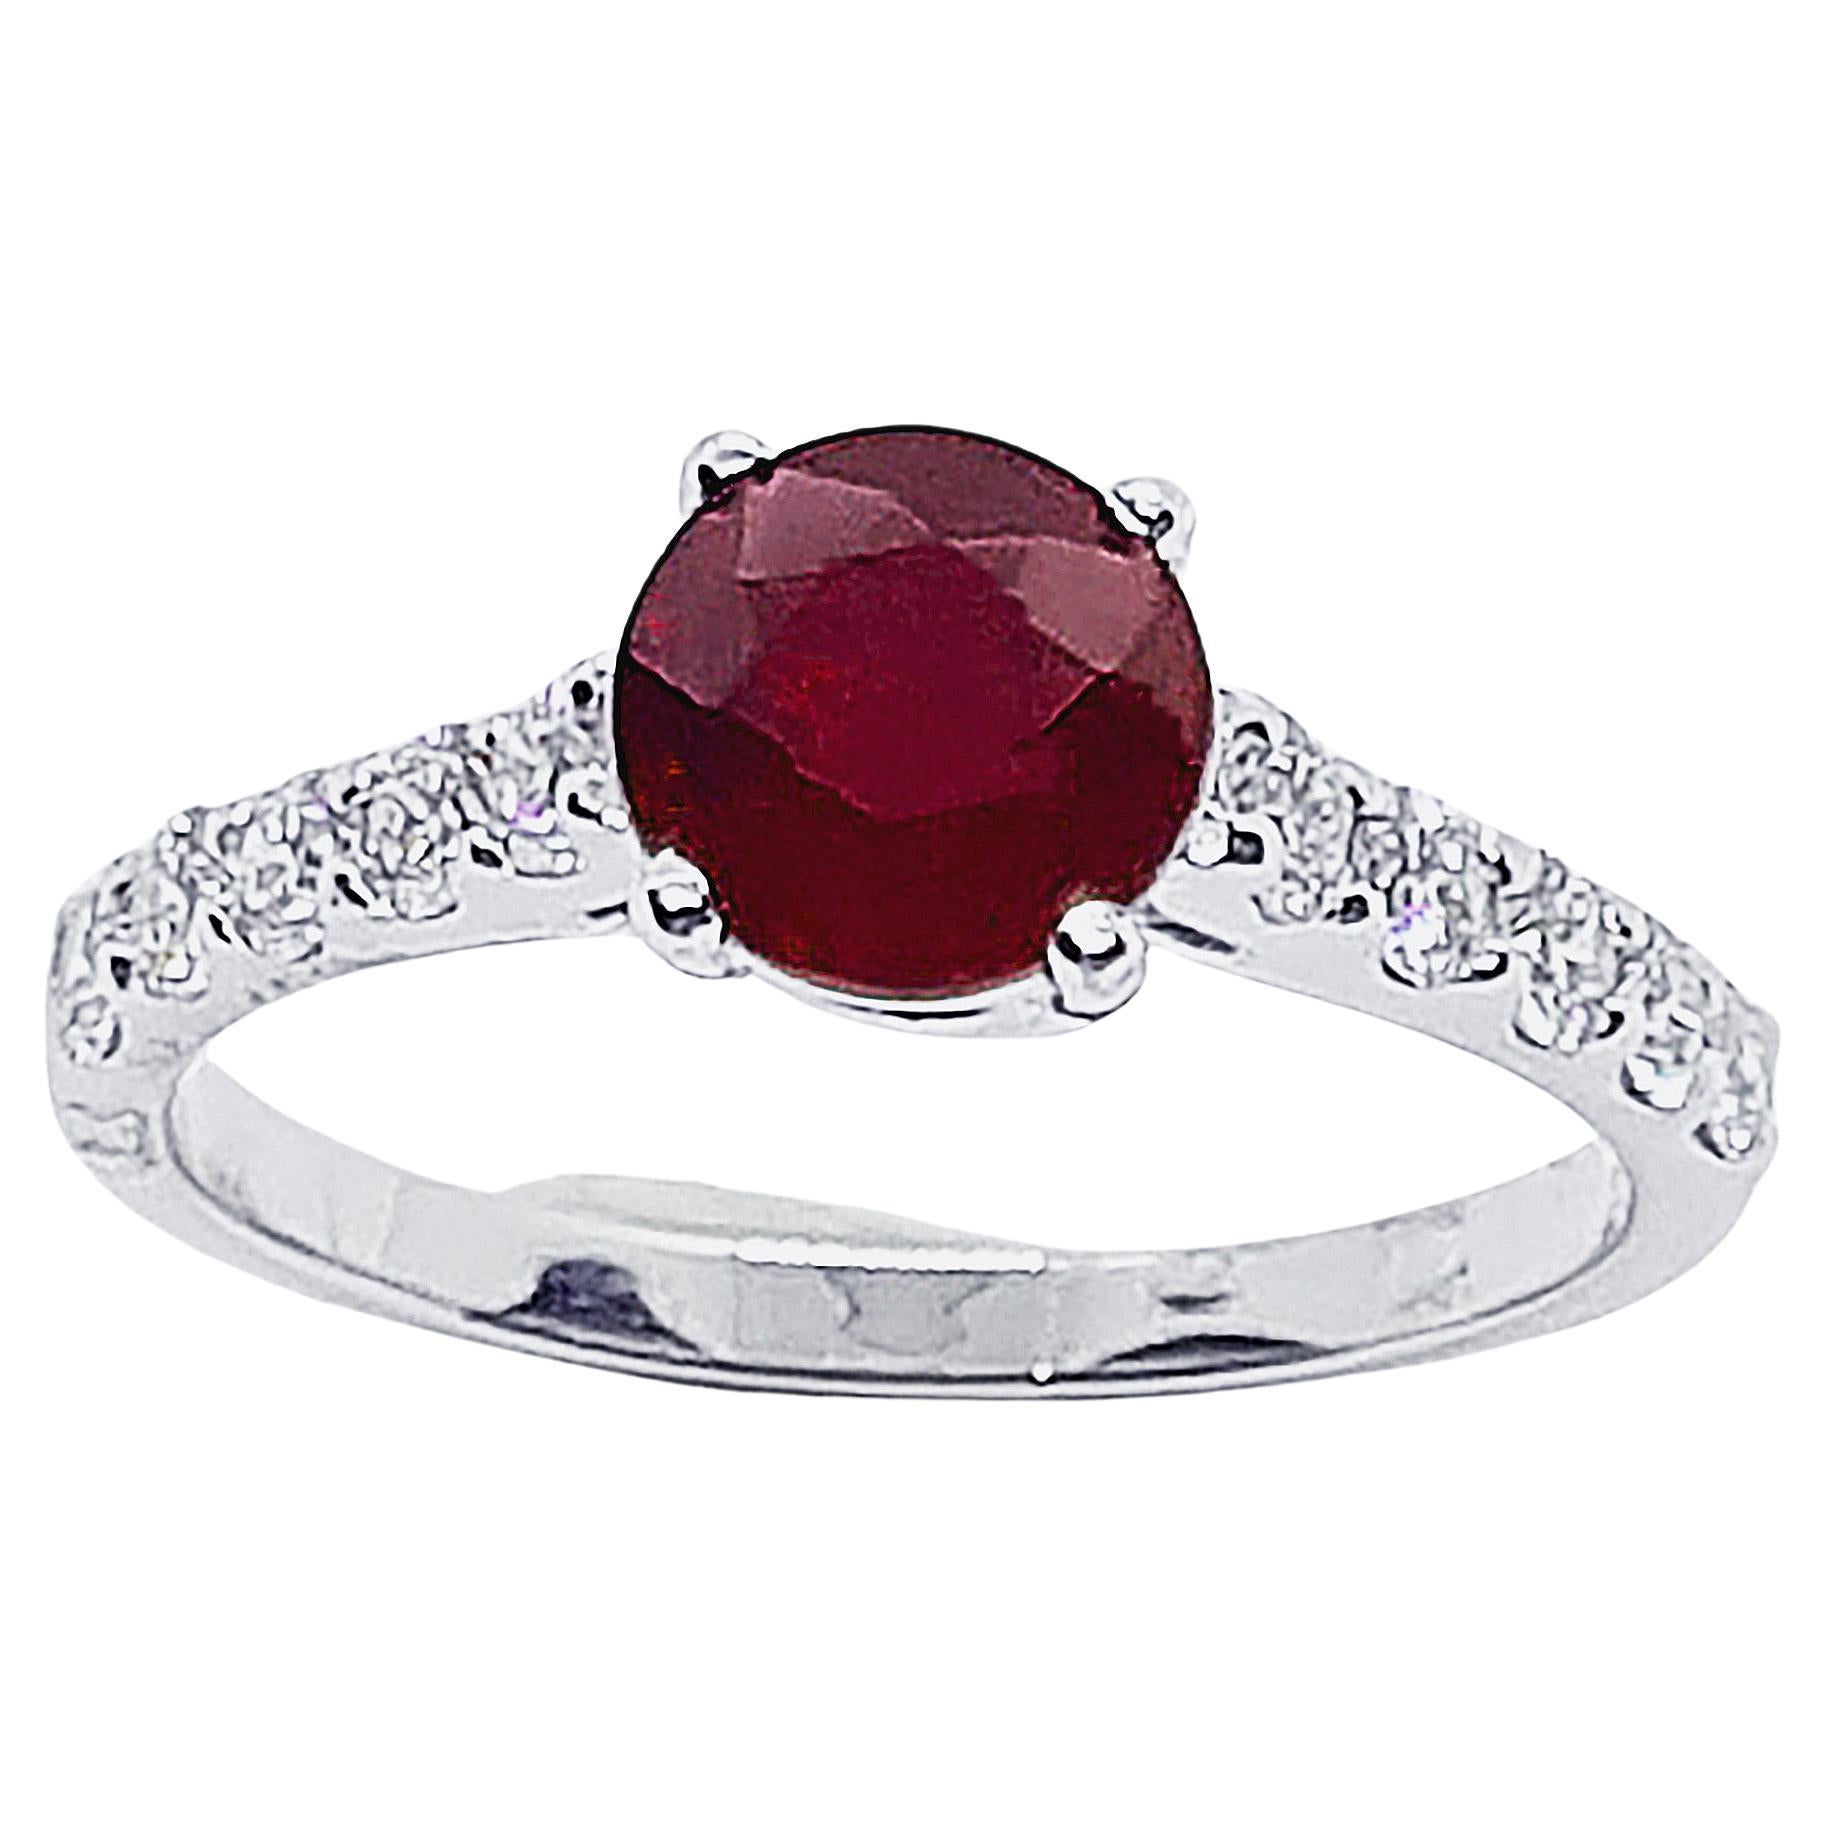 Round-cut ruby with Diamond Ring Set in 18 Karat White Gold Settings